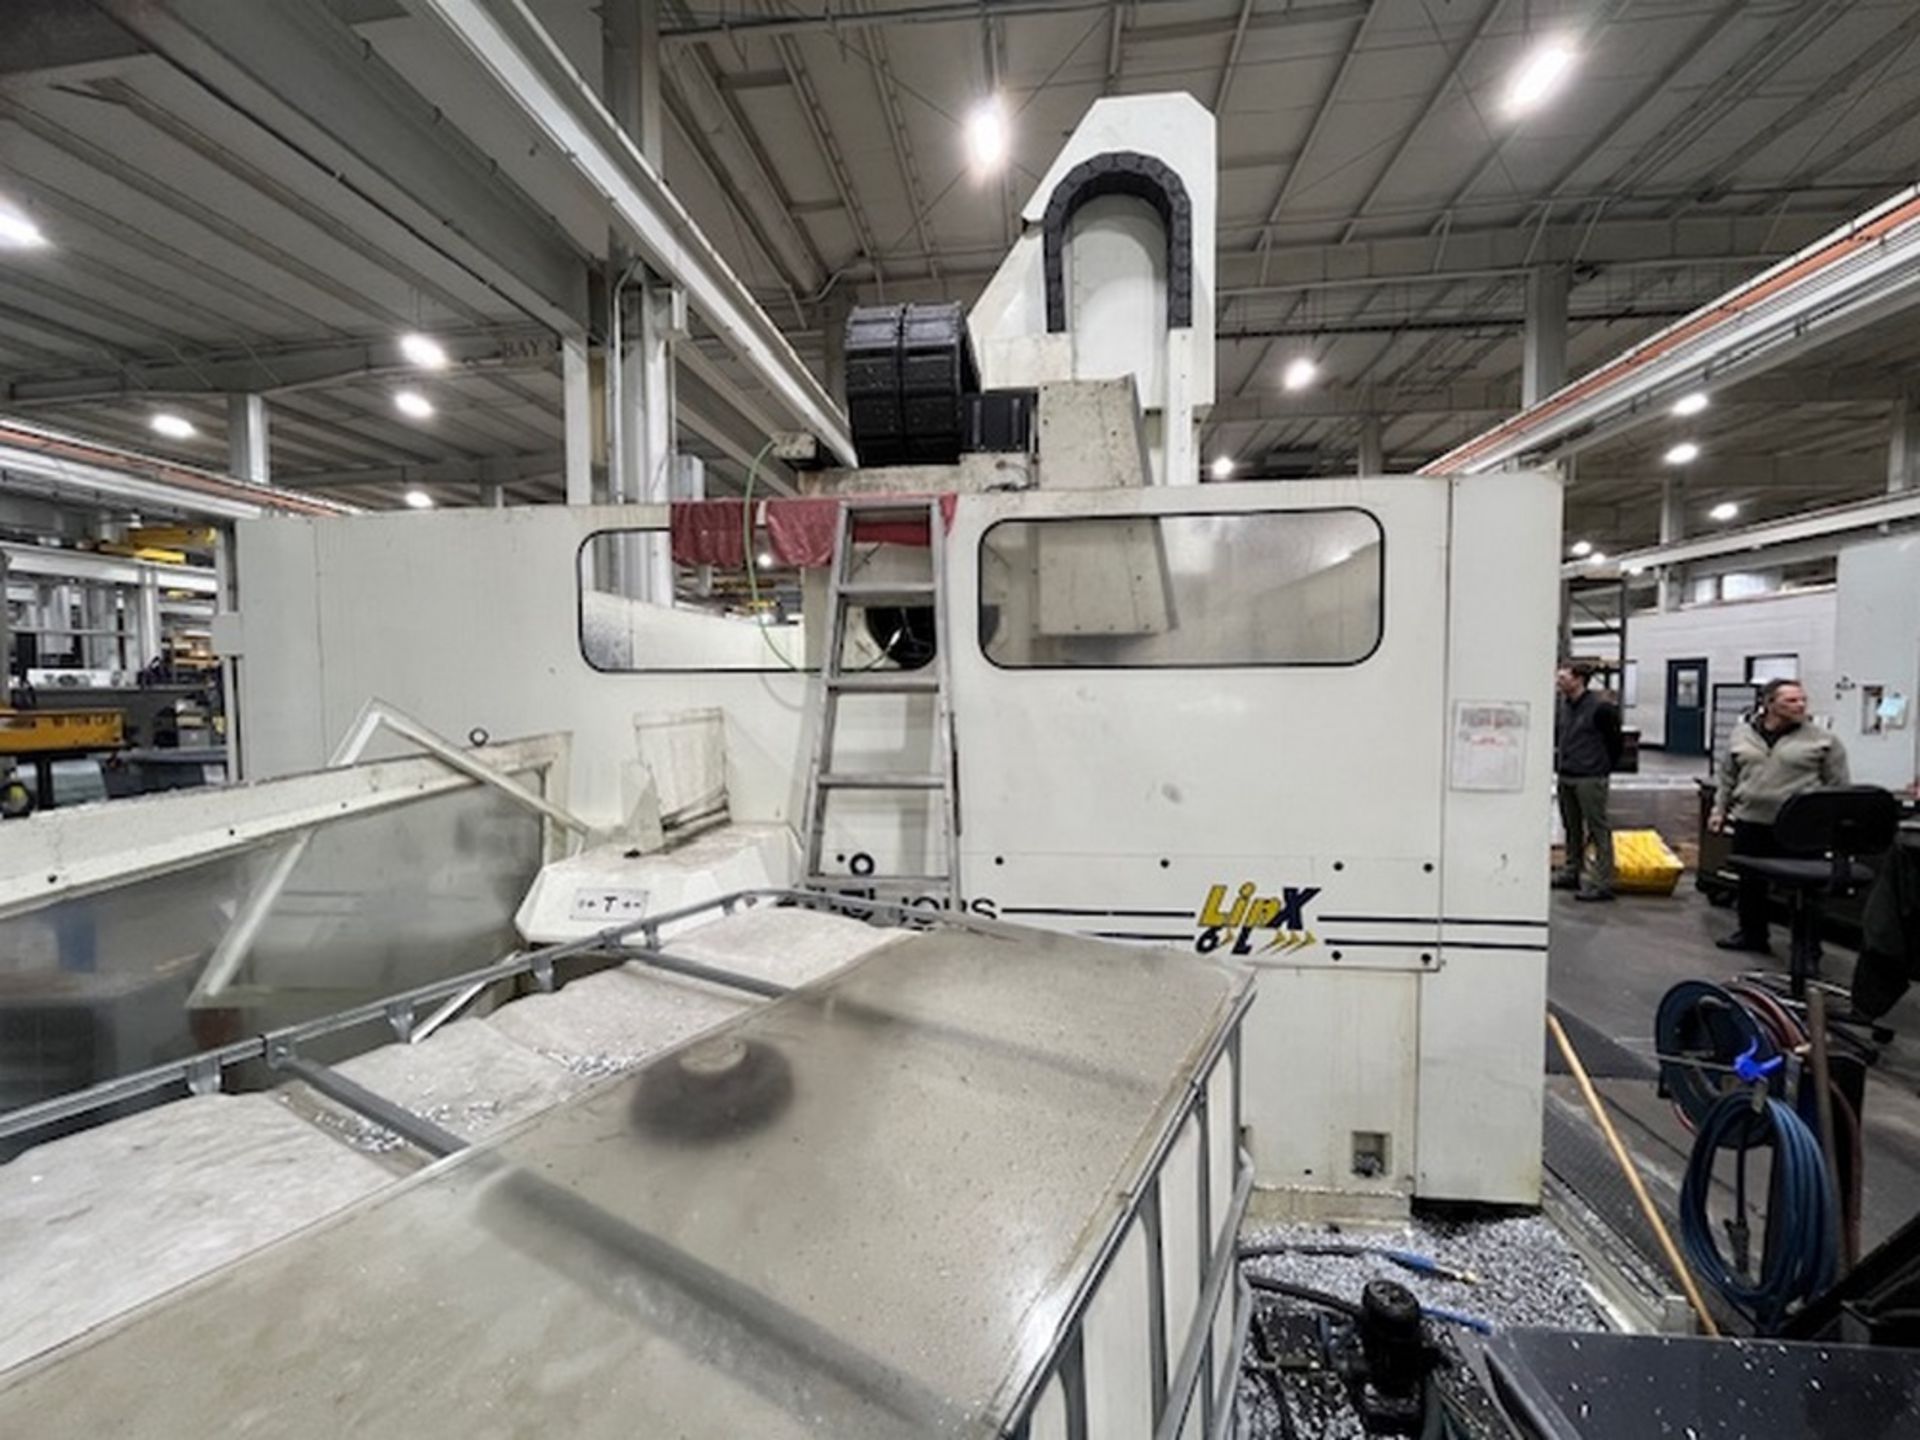 1990 JOBS LINX Machining Center,86" X 125" X 49" Travels, 24,000 RPM HSK Spindle, 20 Station ATC, - Image 2 of 10